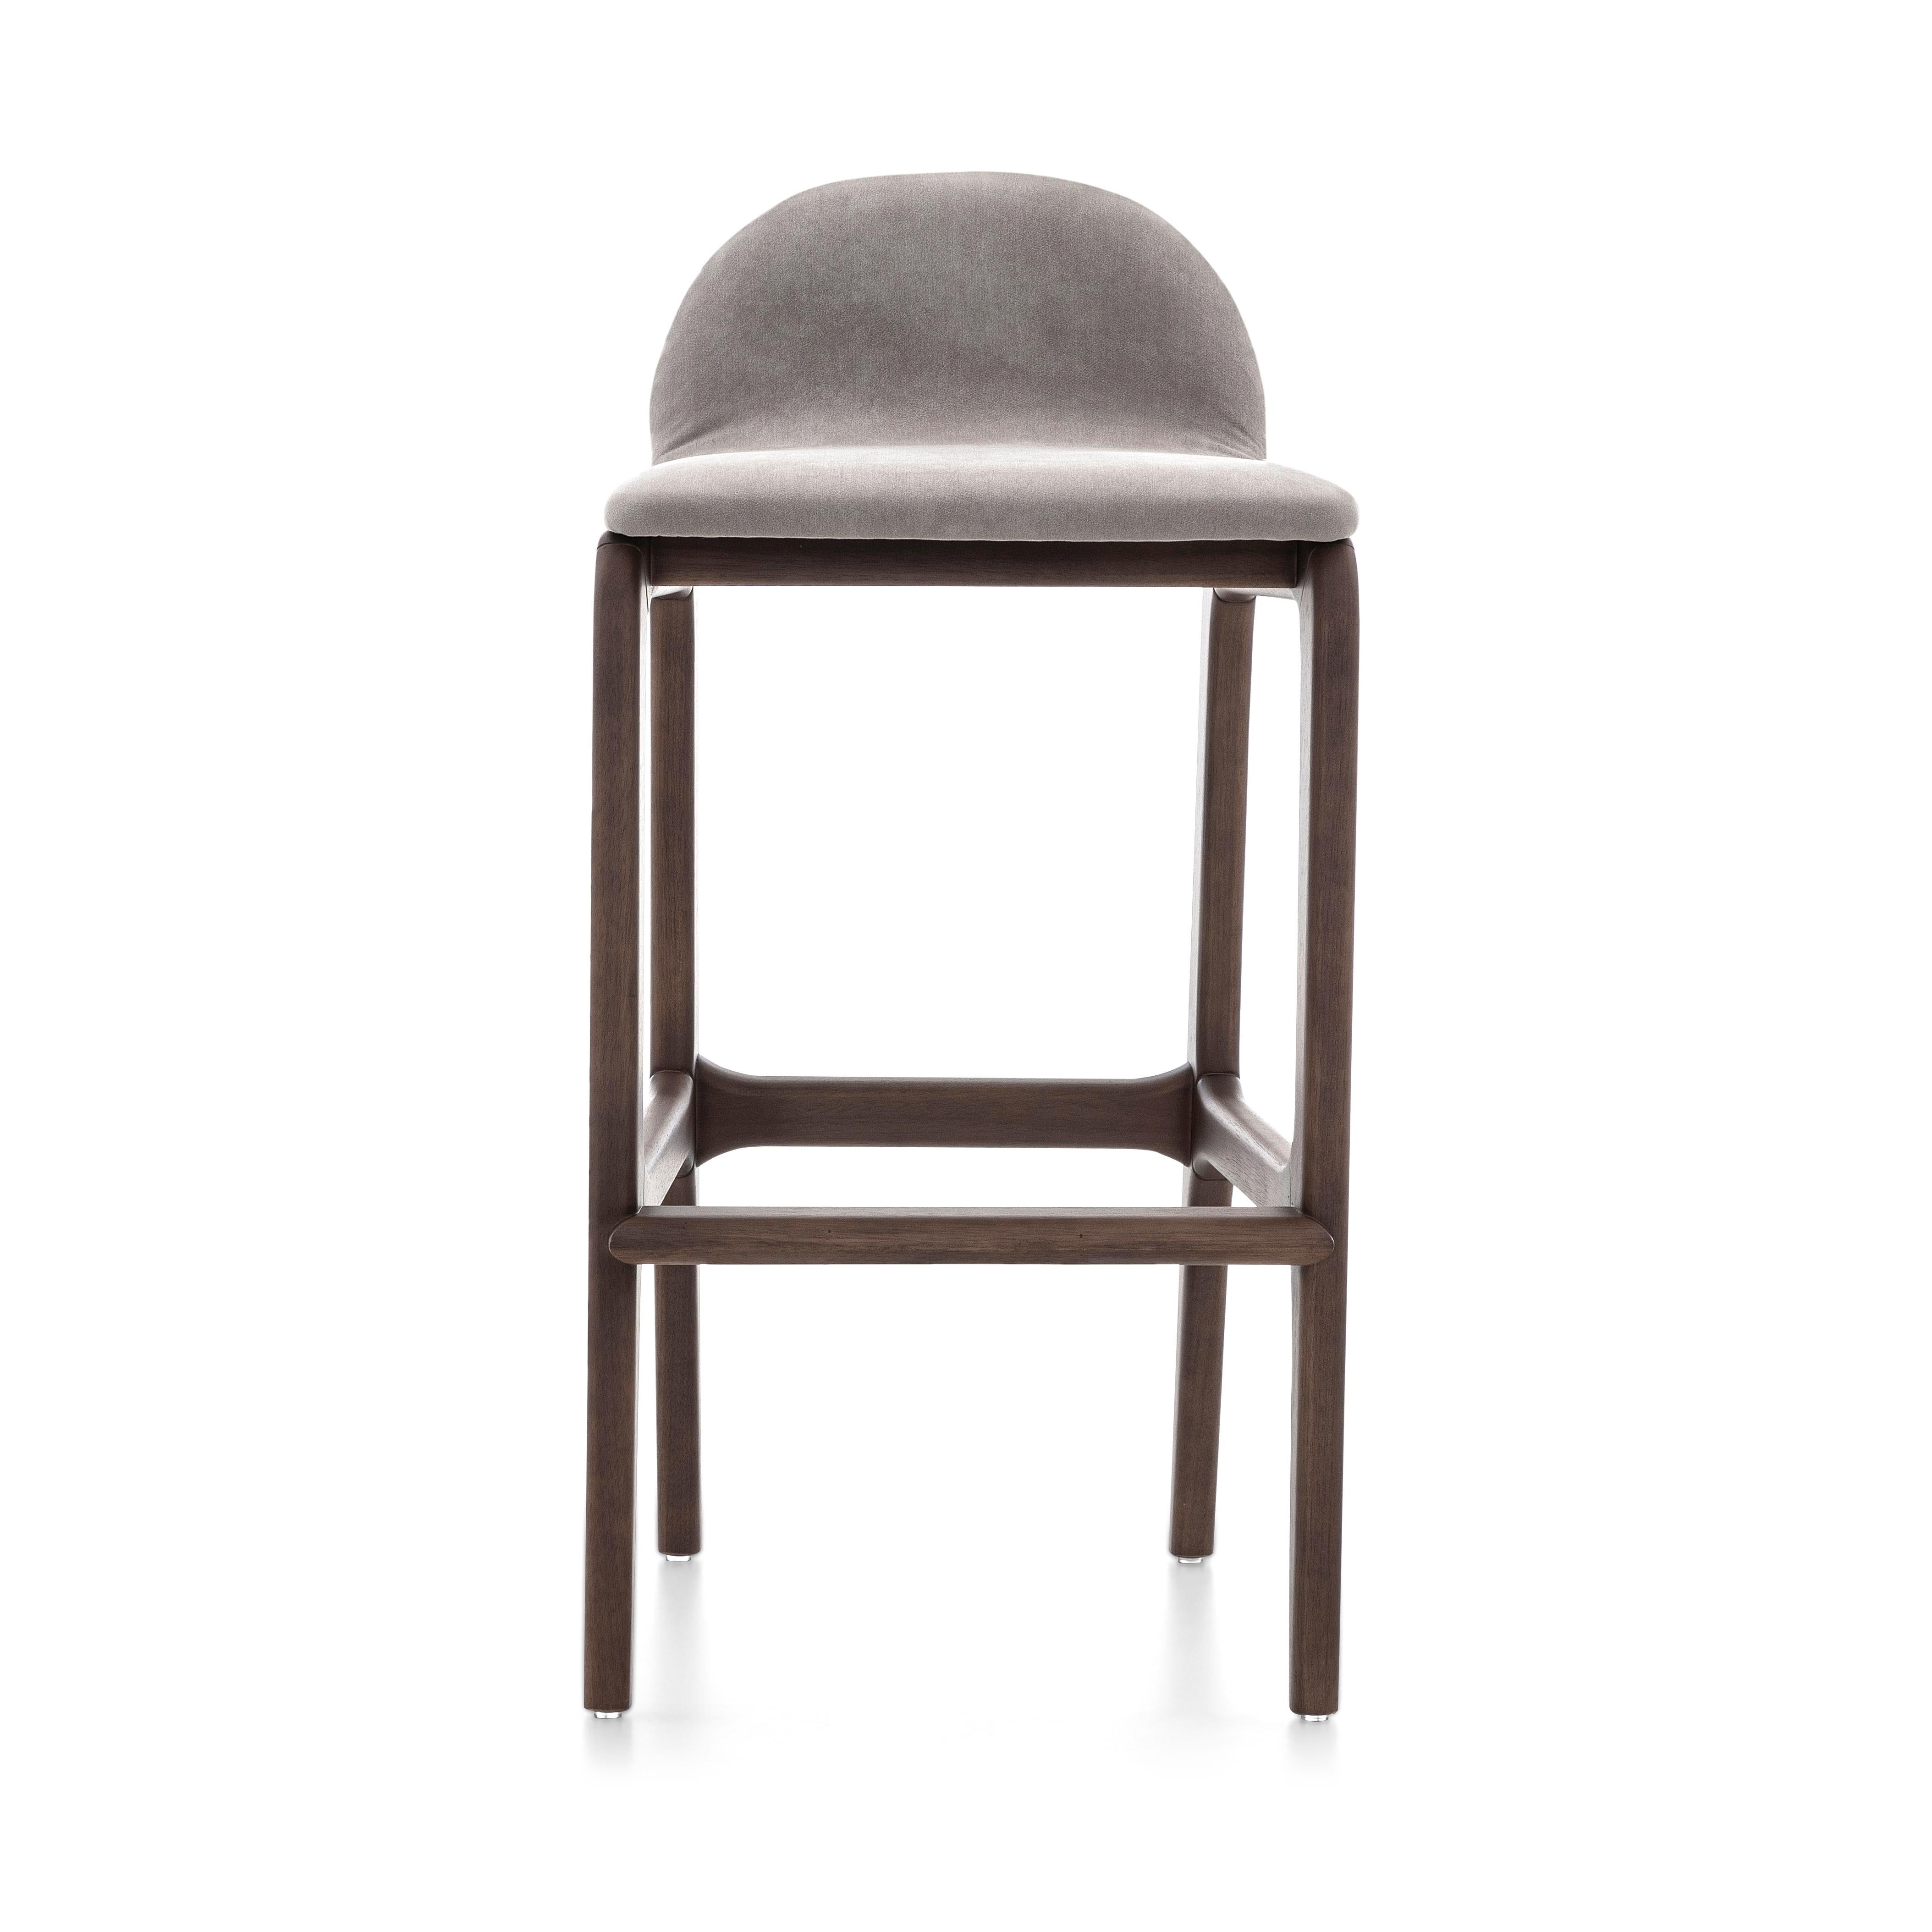 Brazilian Ura Bar Stool in Walnut Wood Finish Base and Upholstered Light Brown Seat For Sale